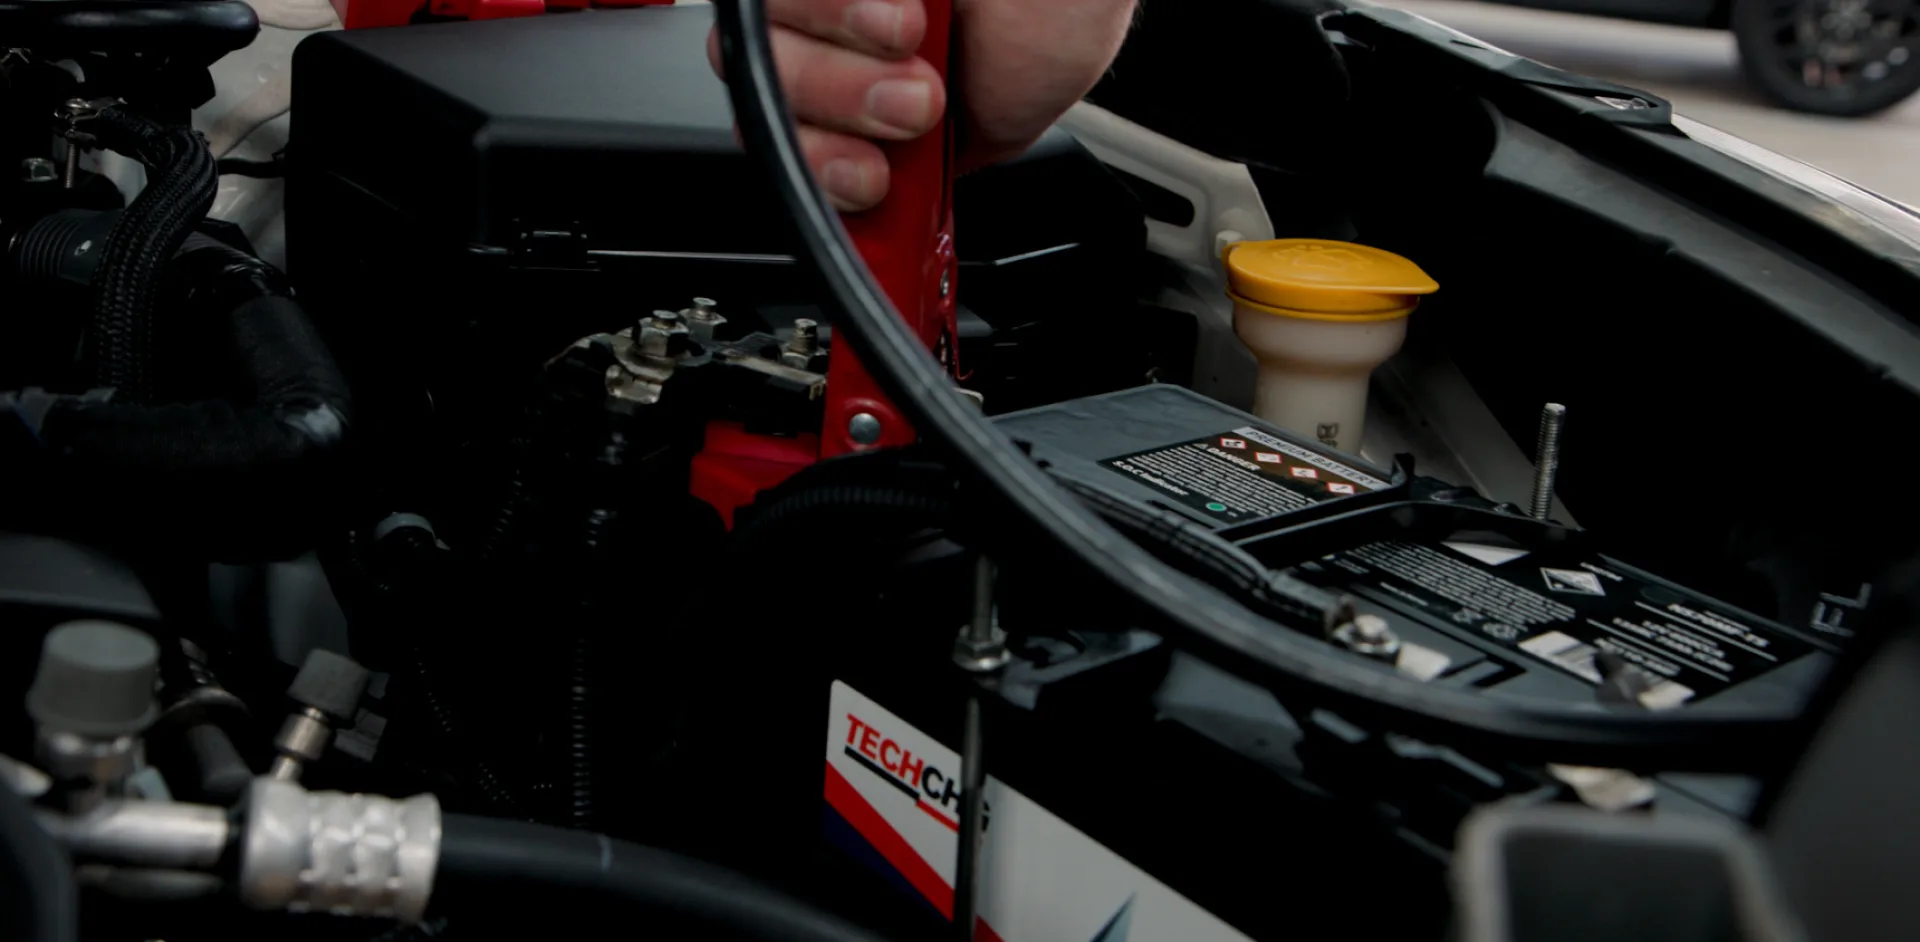 Attaching the positive jumper lead to the positive terminal of the flat battery.